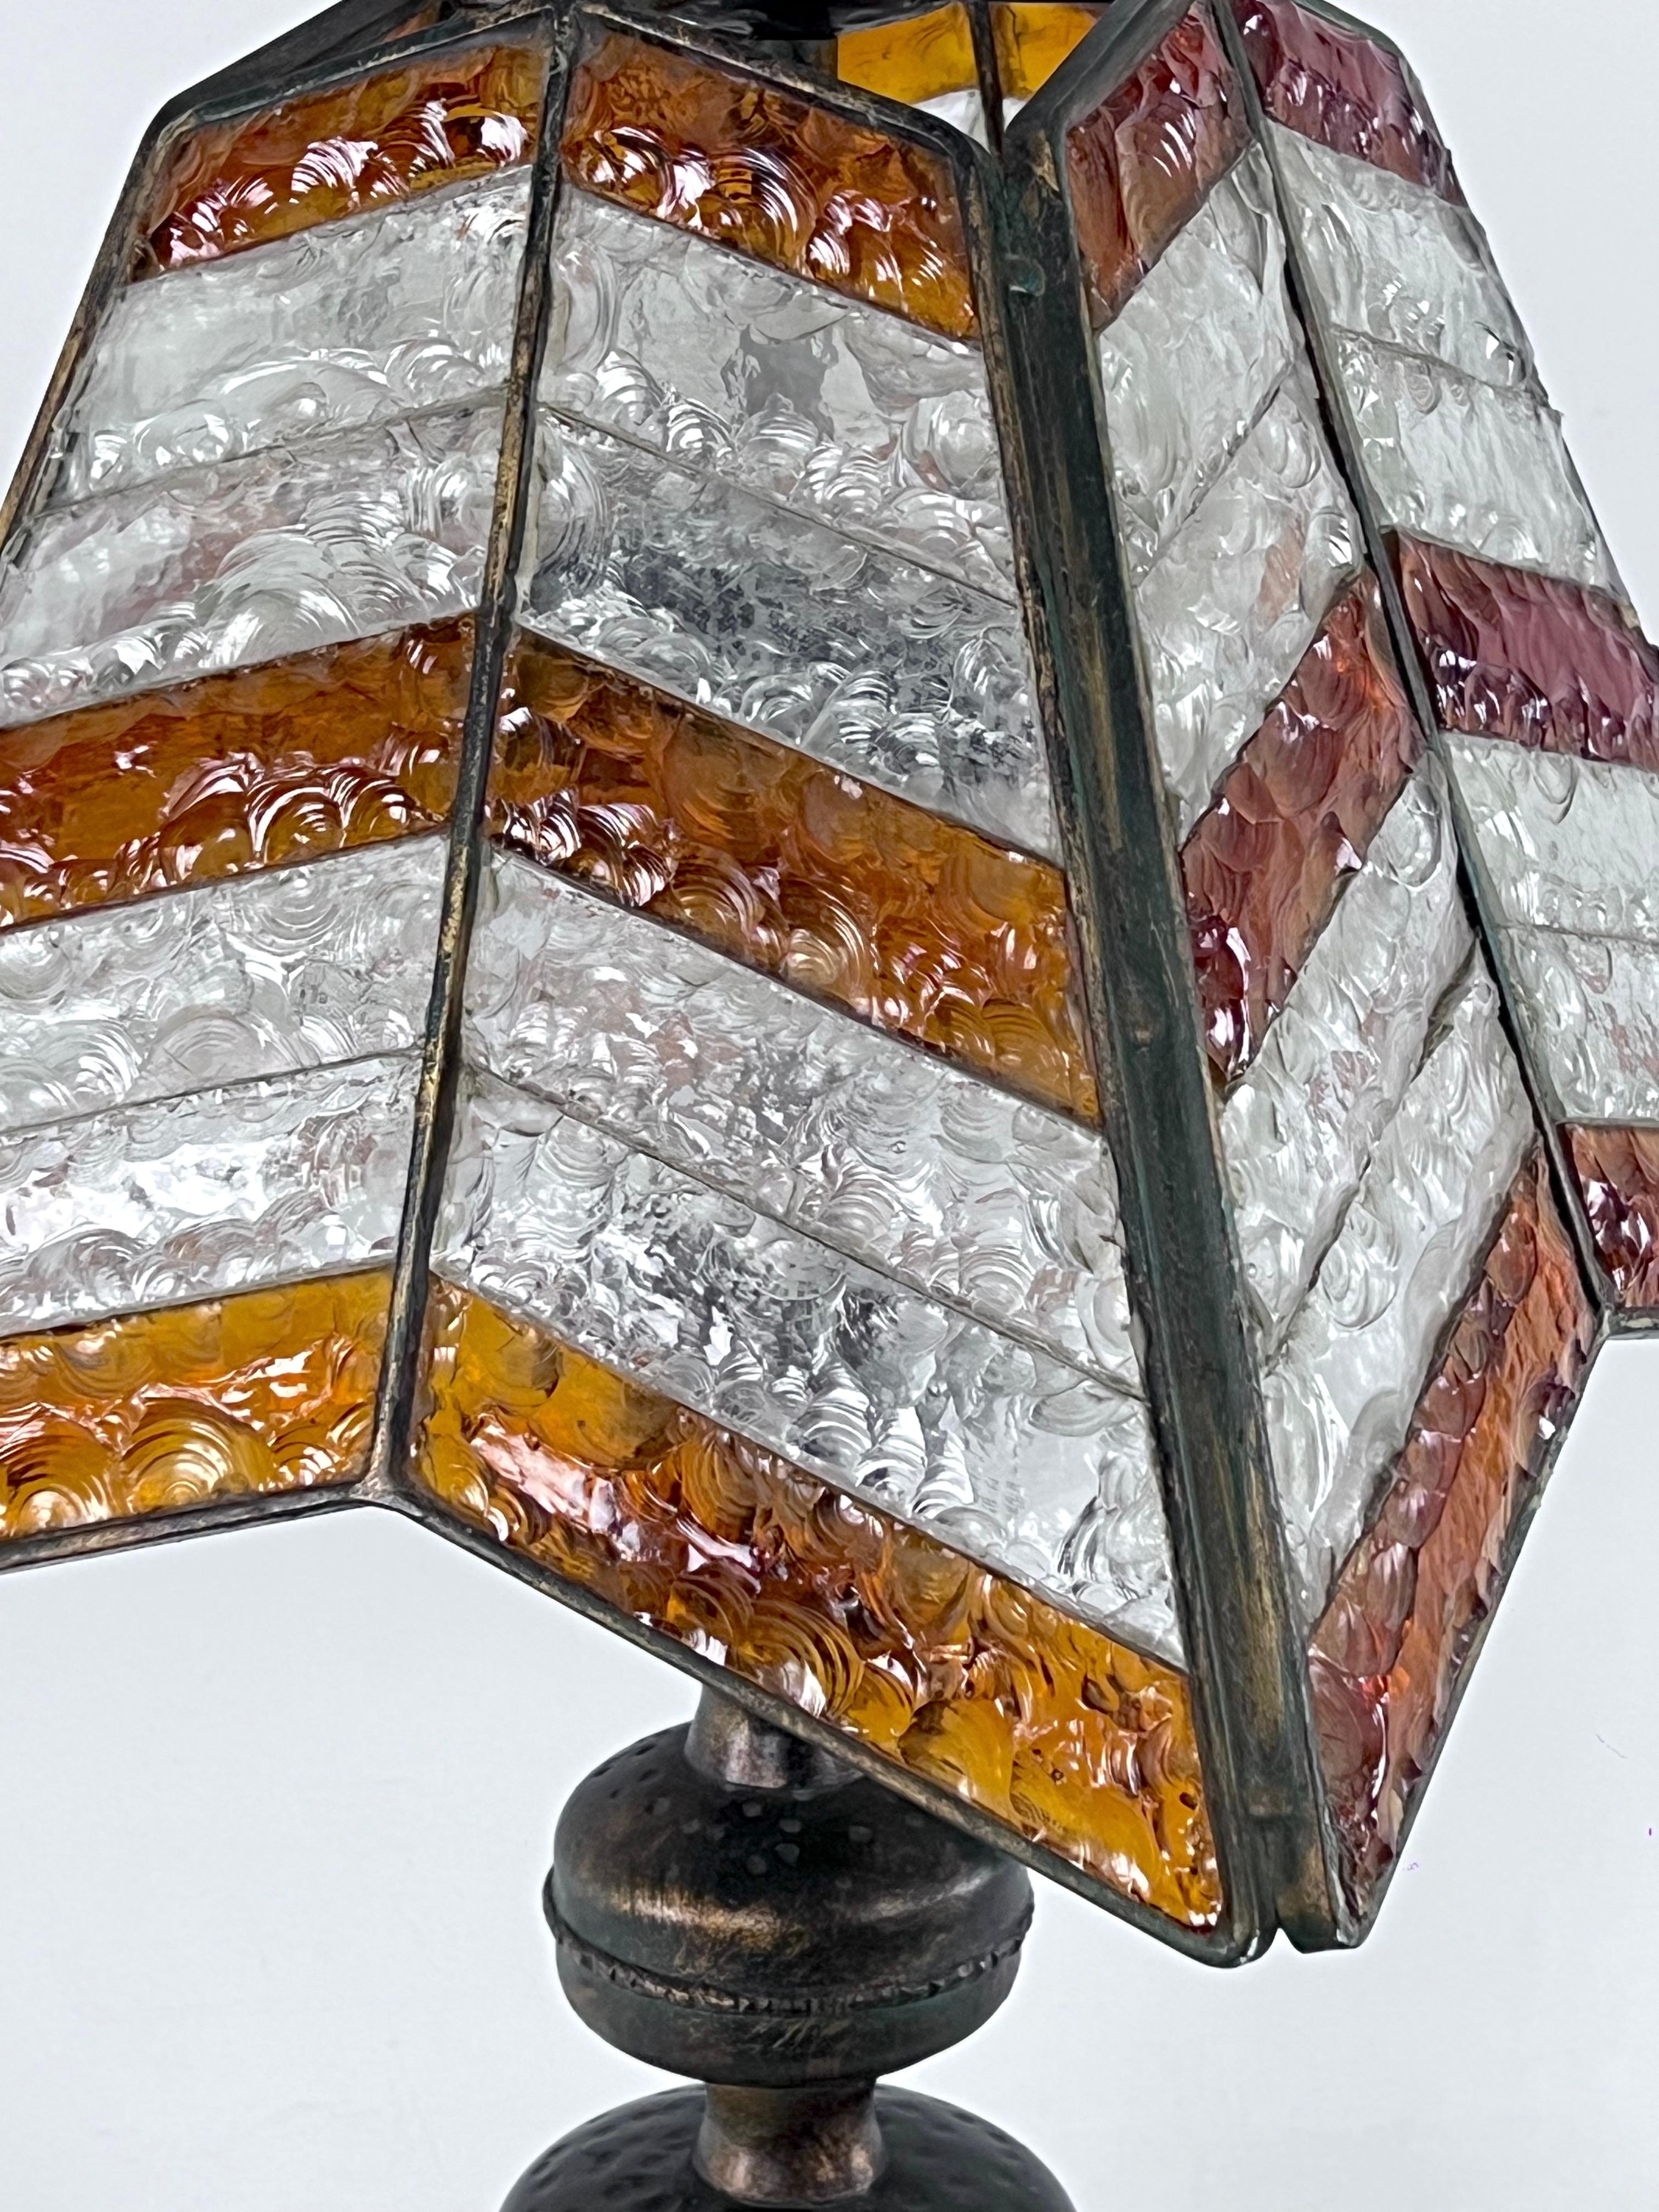 20th Century Monumental Brutalist Thick Glass and Metal Table Lamp by Longobard, Italy, 1970s For Sale